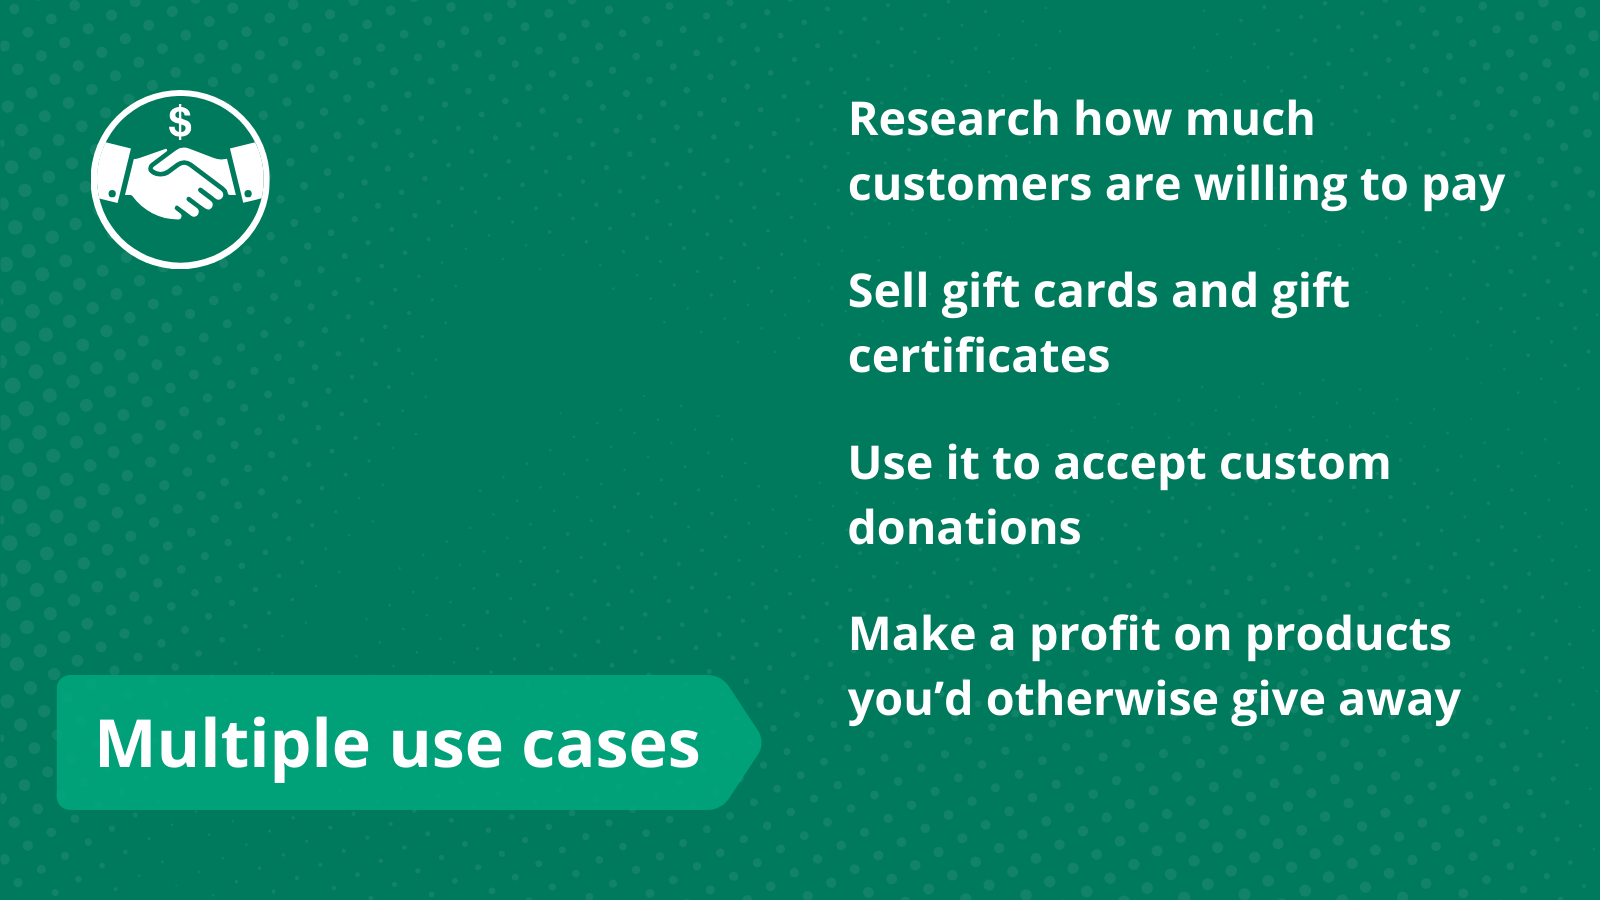 Research, sell gift cards, accept custom donations